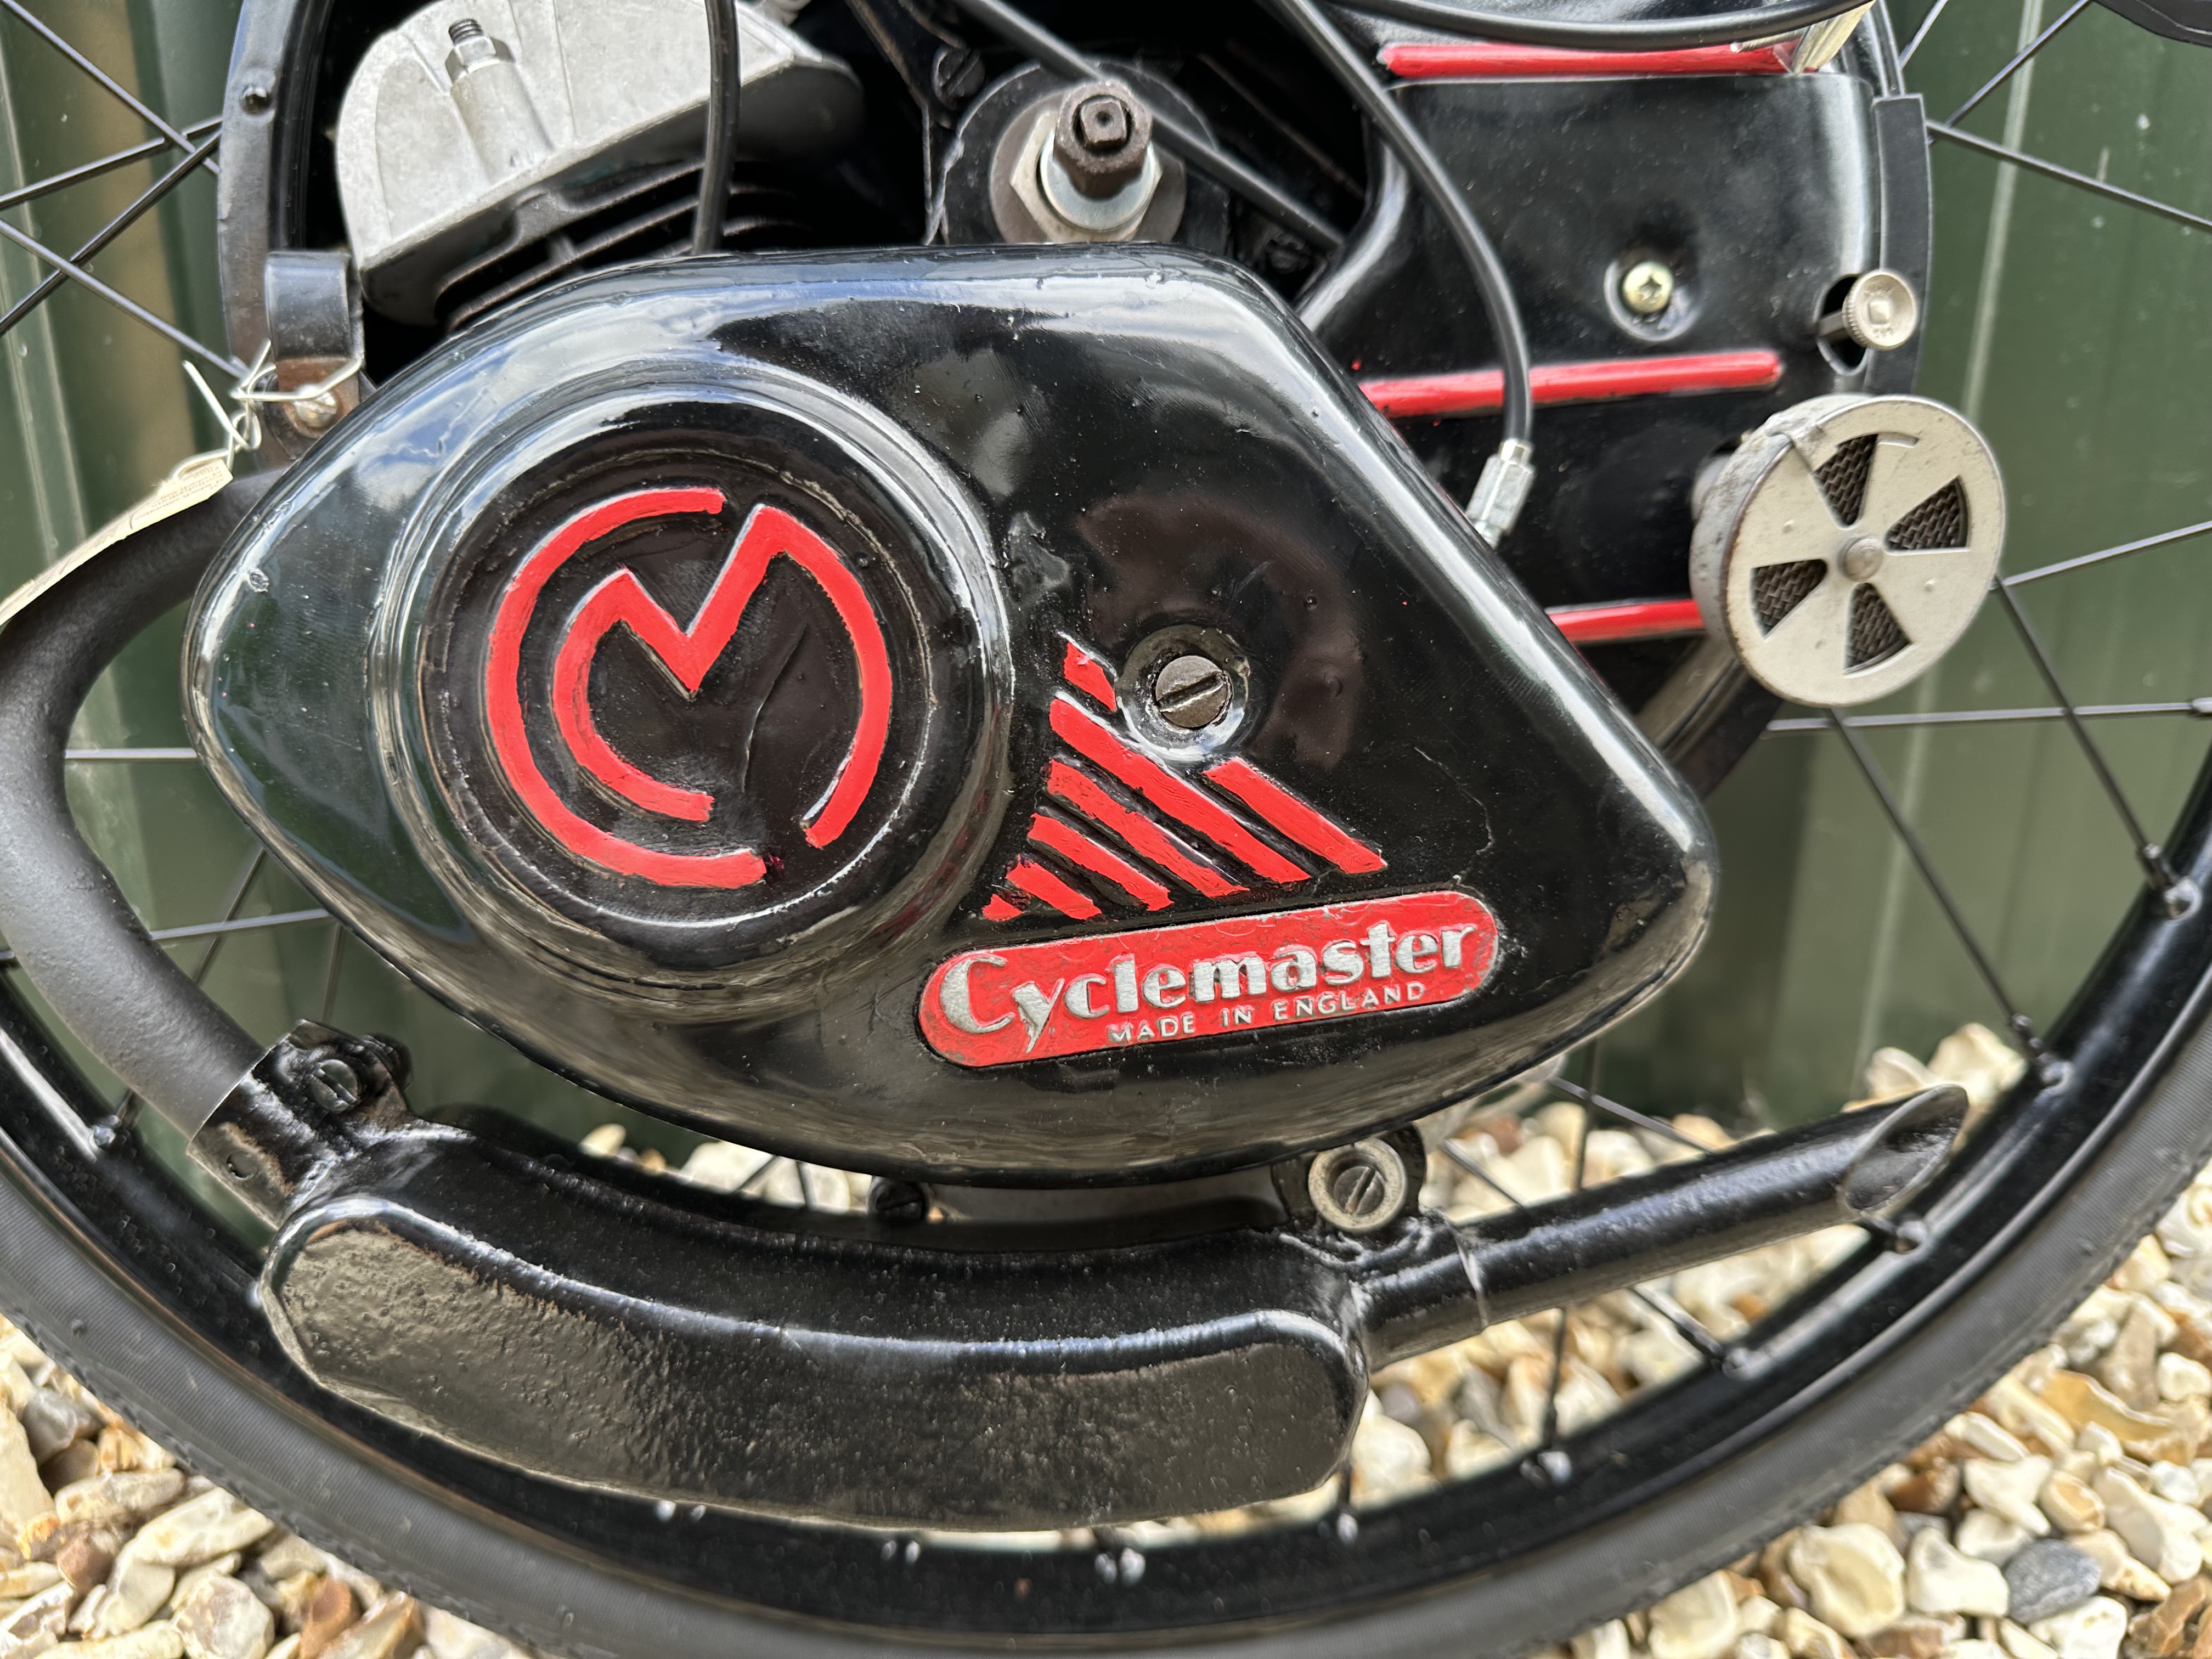 Cyclemaster 25.7cc Reg. no. n/a Frame no. n/a Engine no. A1332L This Cyclemaster has had a - Image 4 of 6